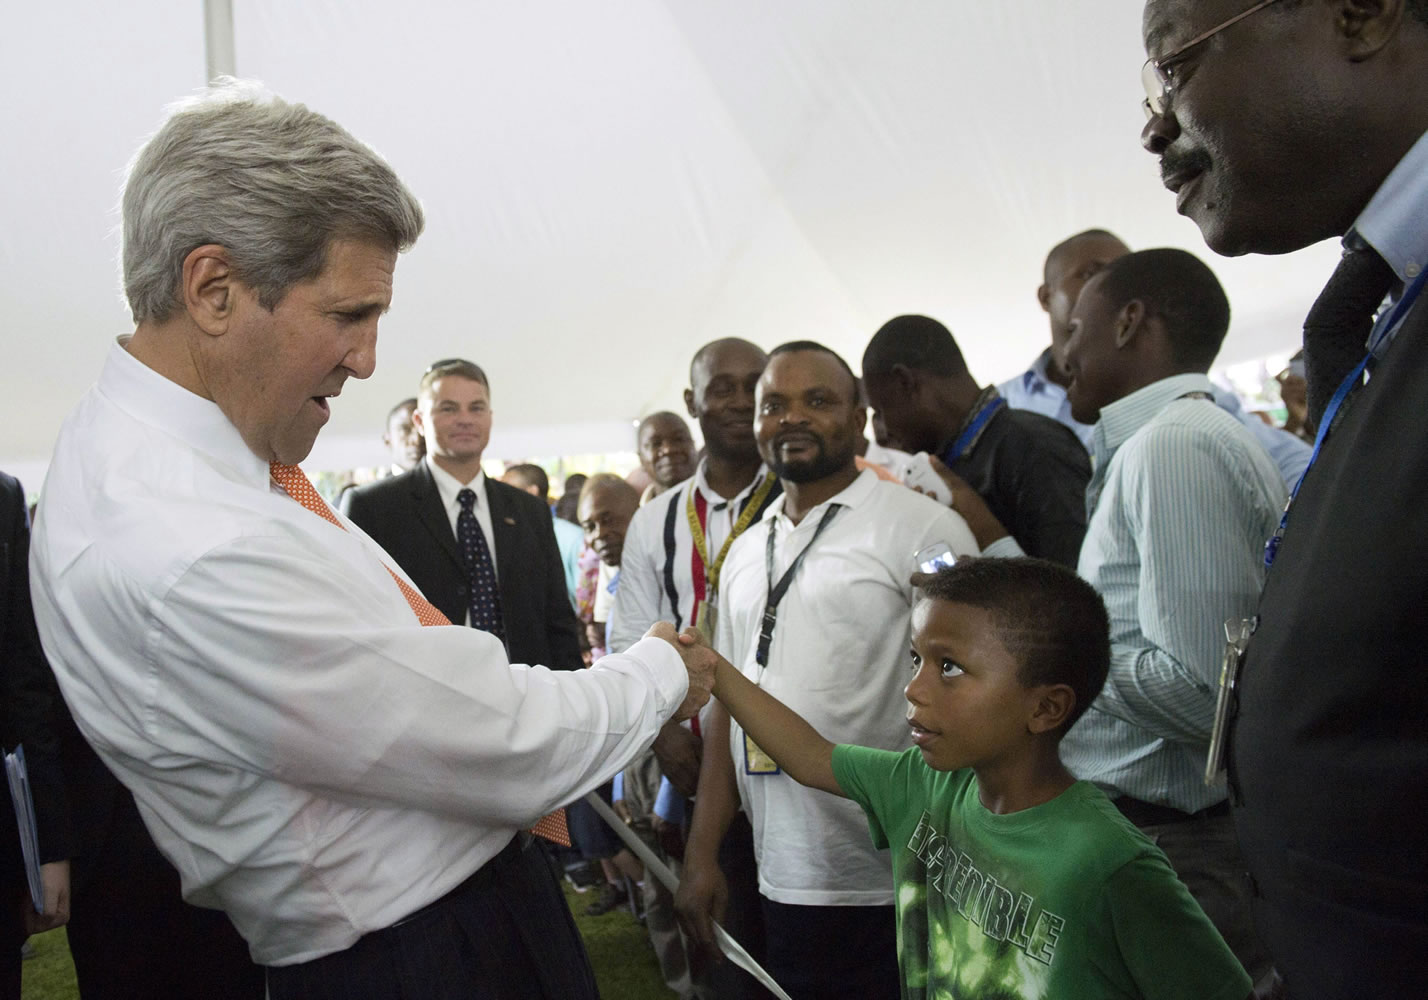 U.S. Secretary of State John Kerry greets an unidentified boy Saturday during meetings with U.S. embassy staff and families at the Chief of Mission Residence in Kinshasa, Democratic Republic of Congo.